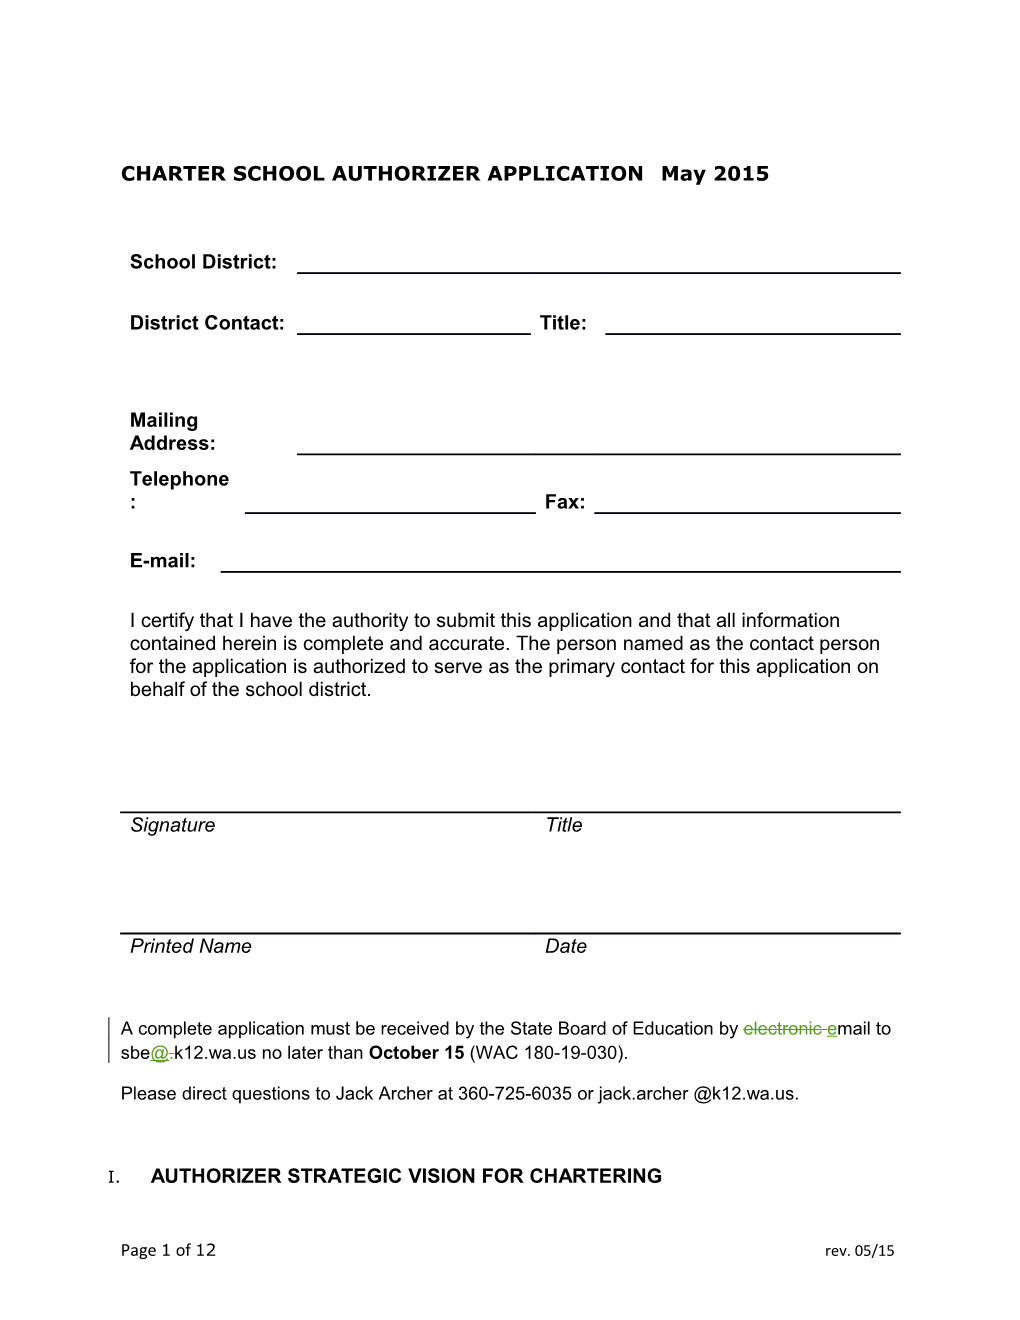 CHARTER SCHOOL AUTHORIZER Applicationmay 2015